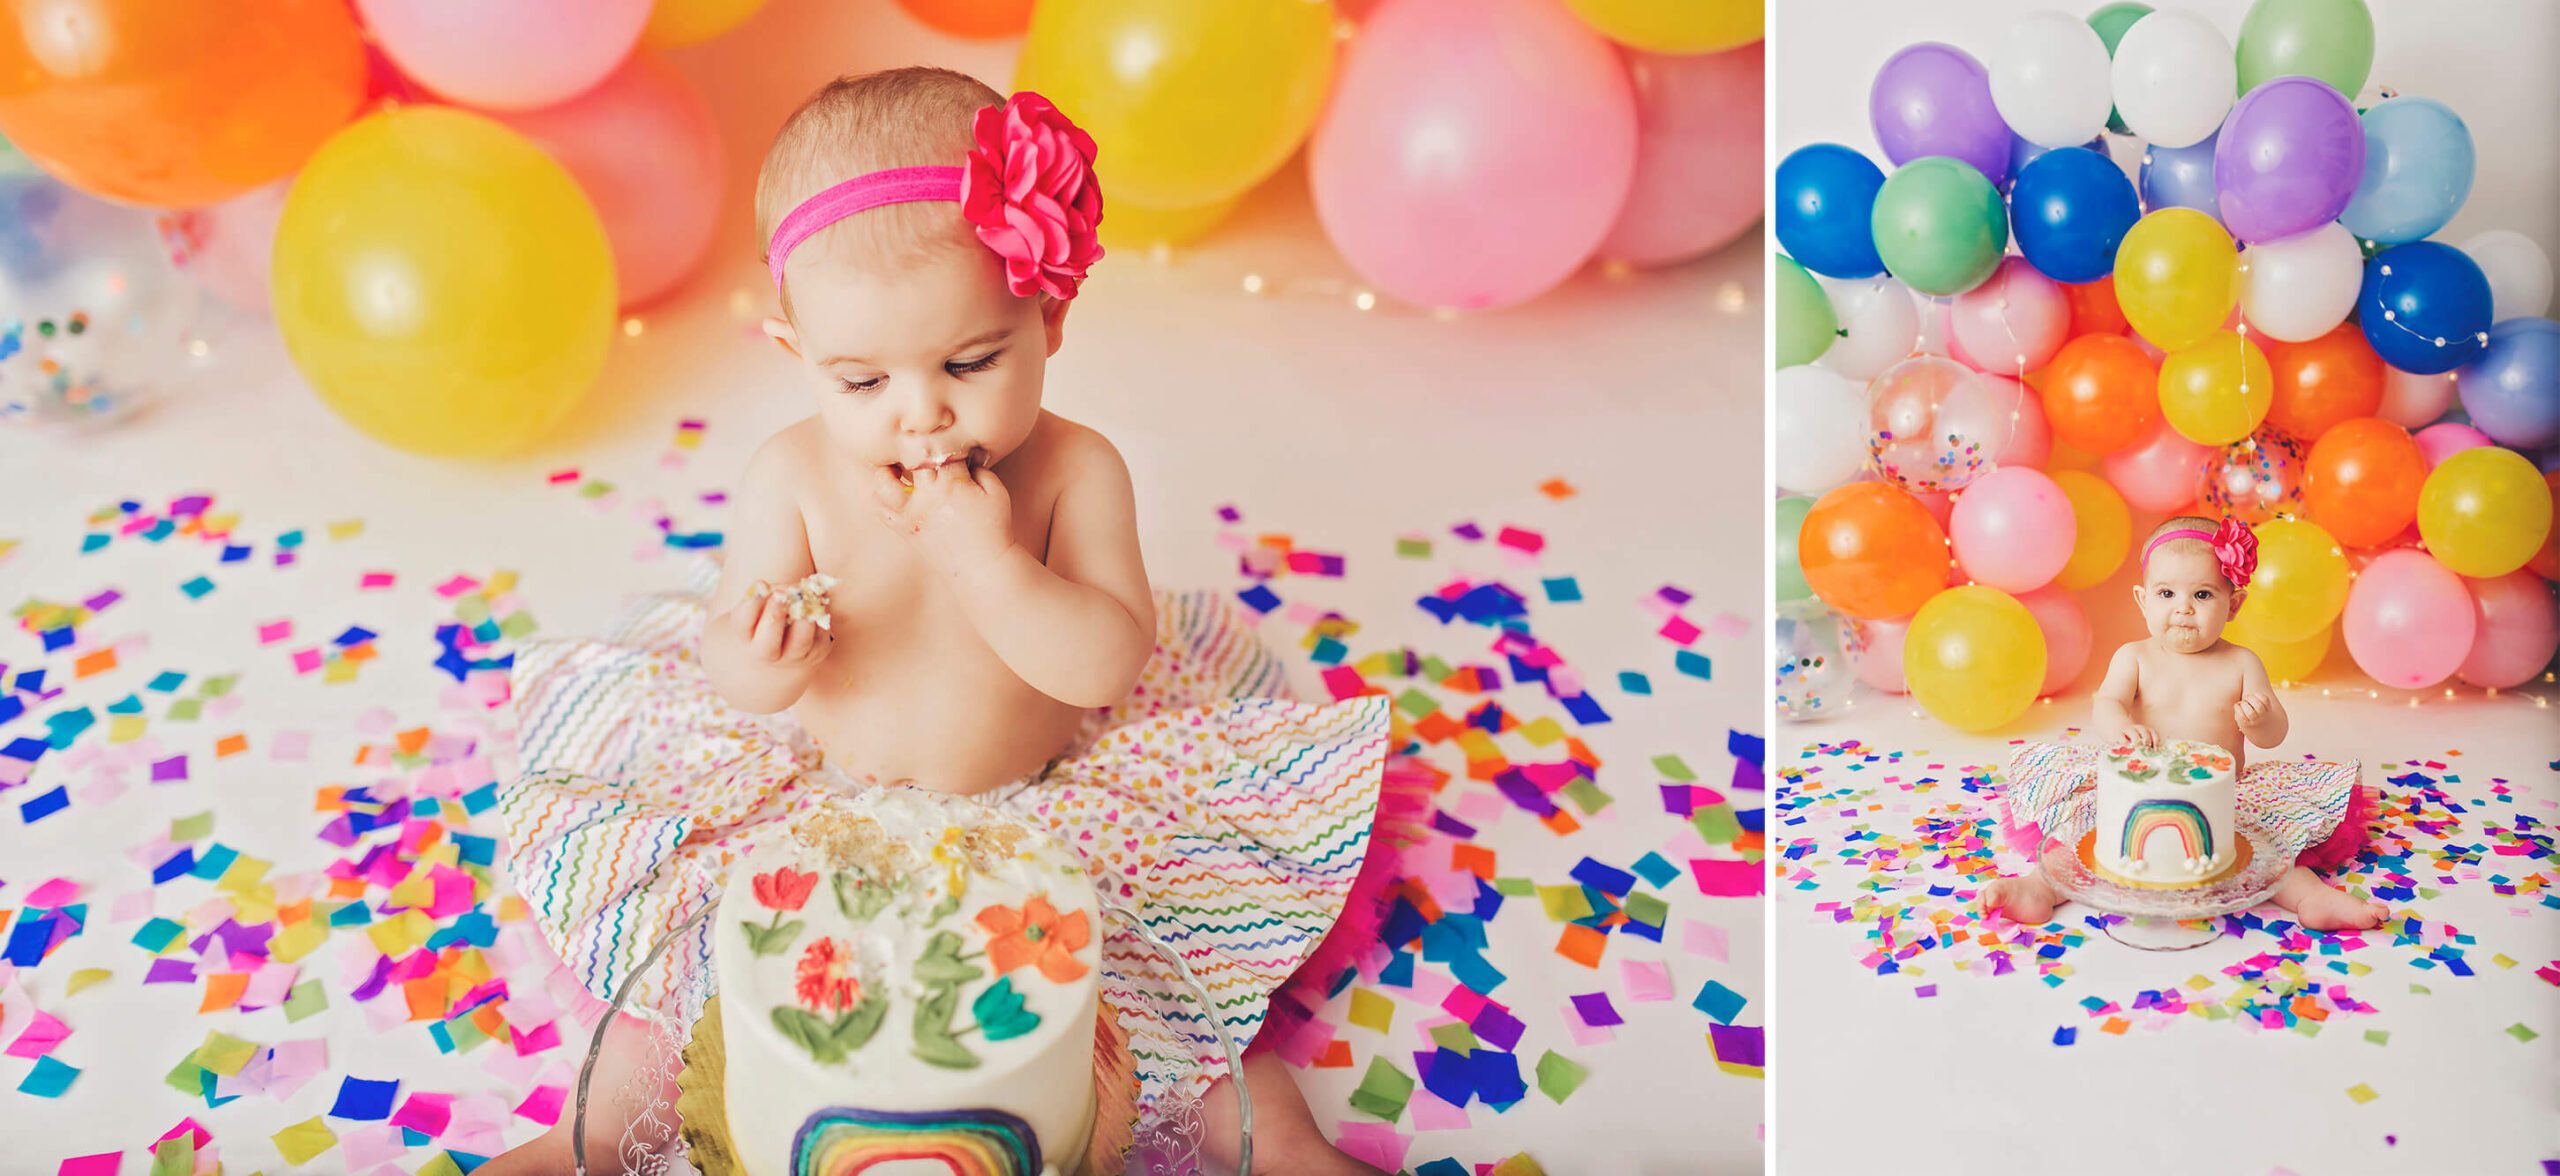 Baby cake eating photos are the cutest